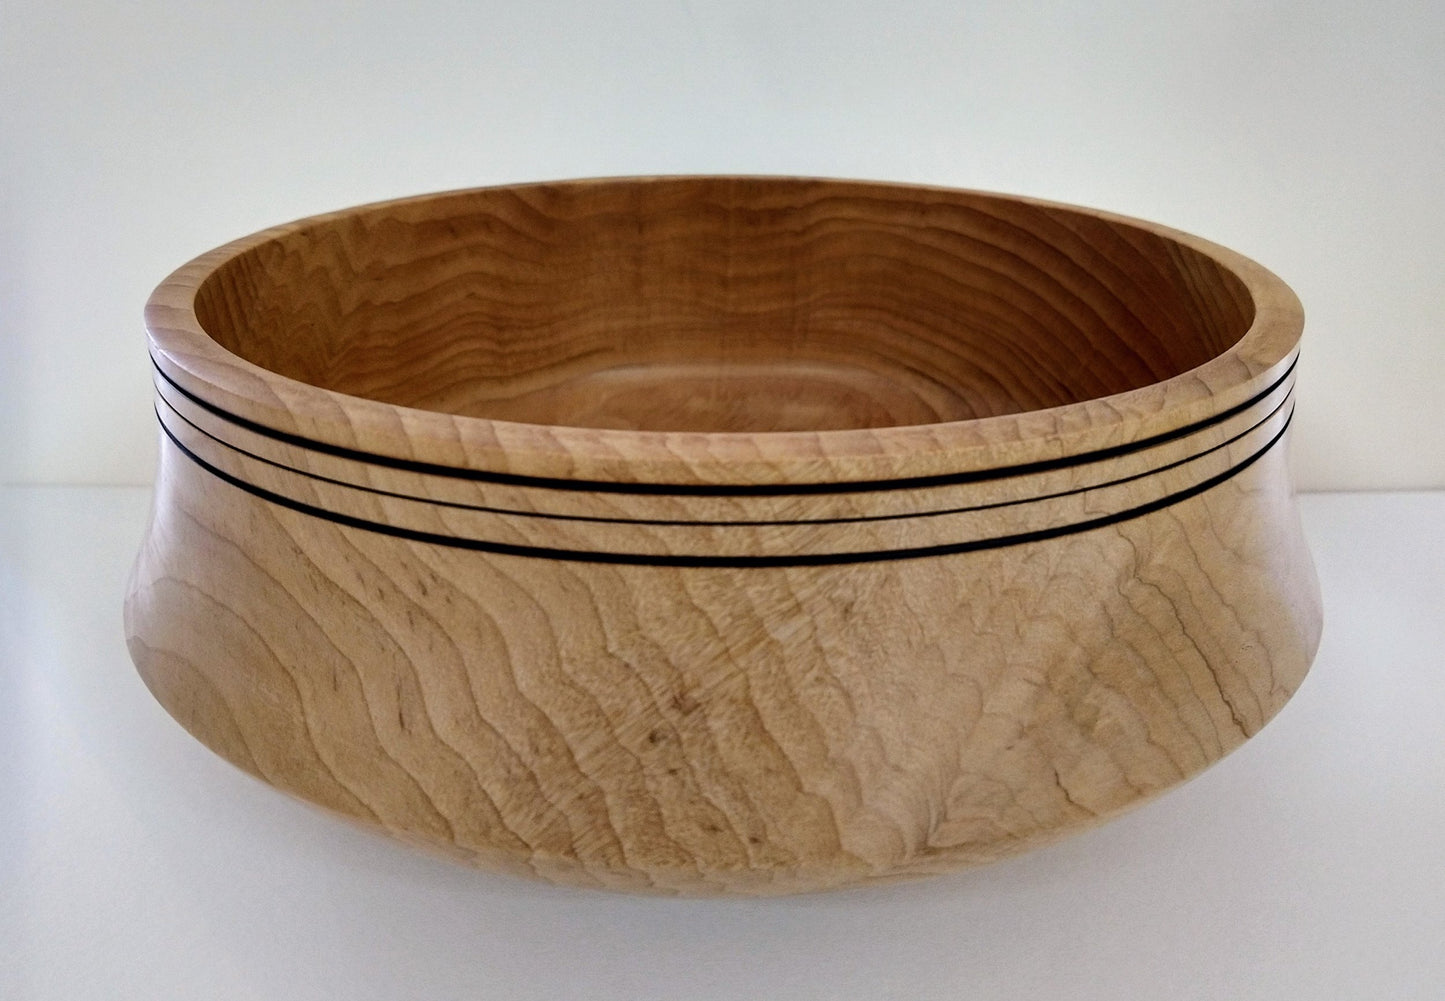 Andy Harris- Turned Wooden Bowl